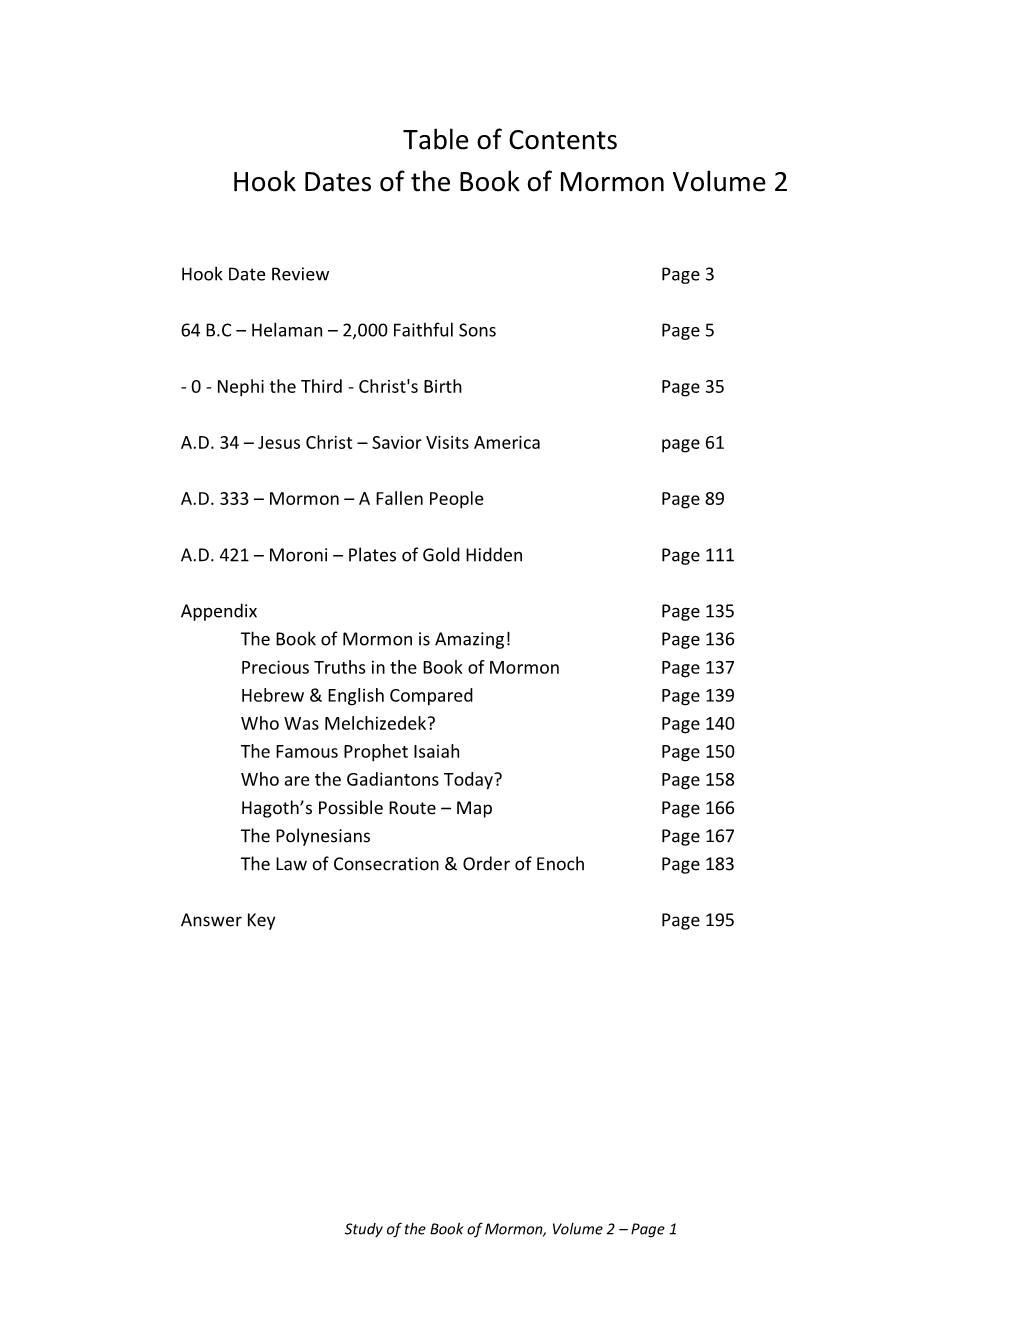 Table of Contents Hook Dates of the Book of Mormon Volume 2